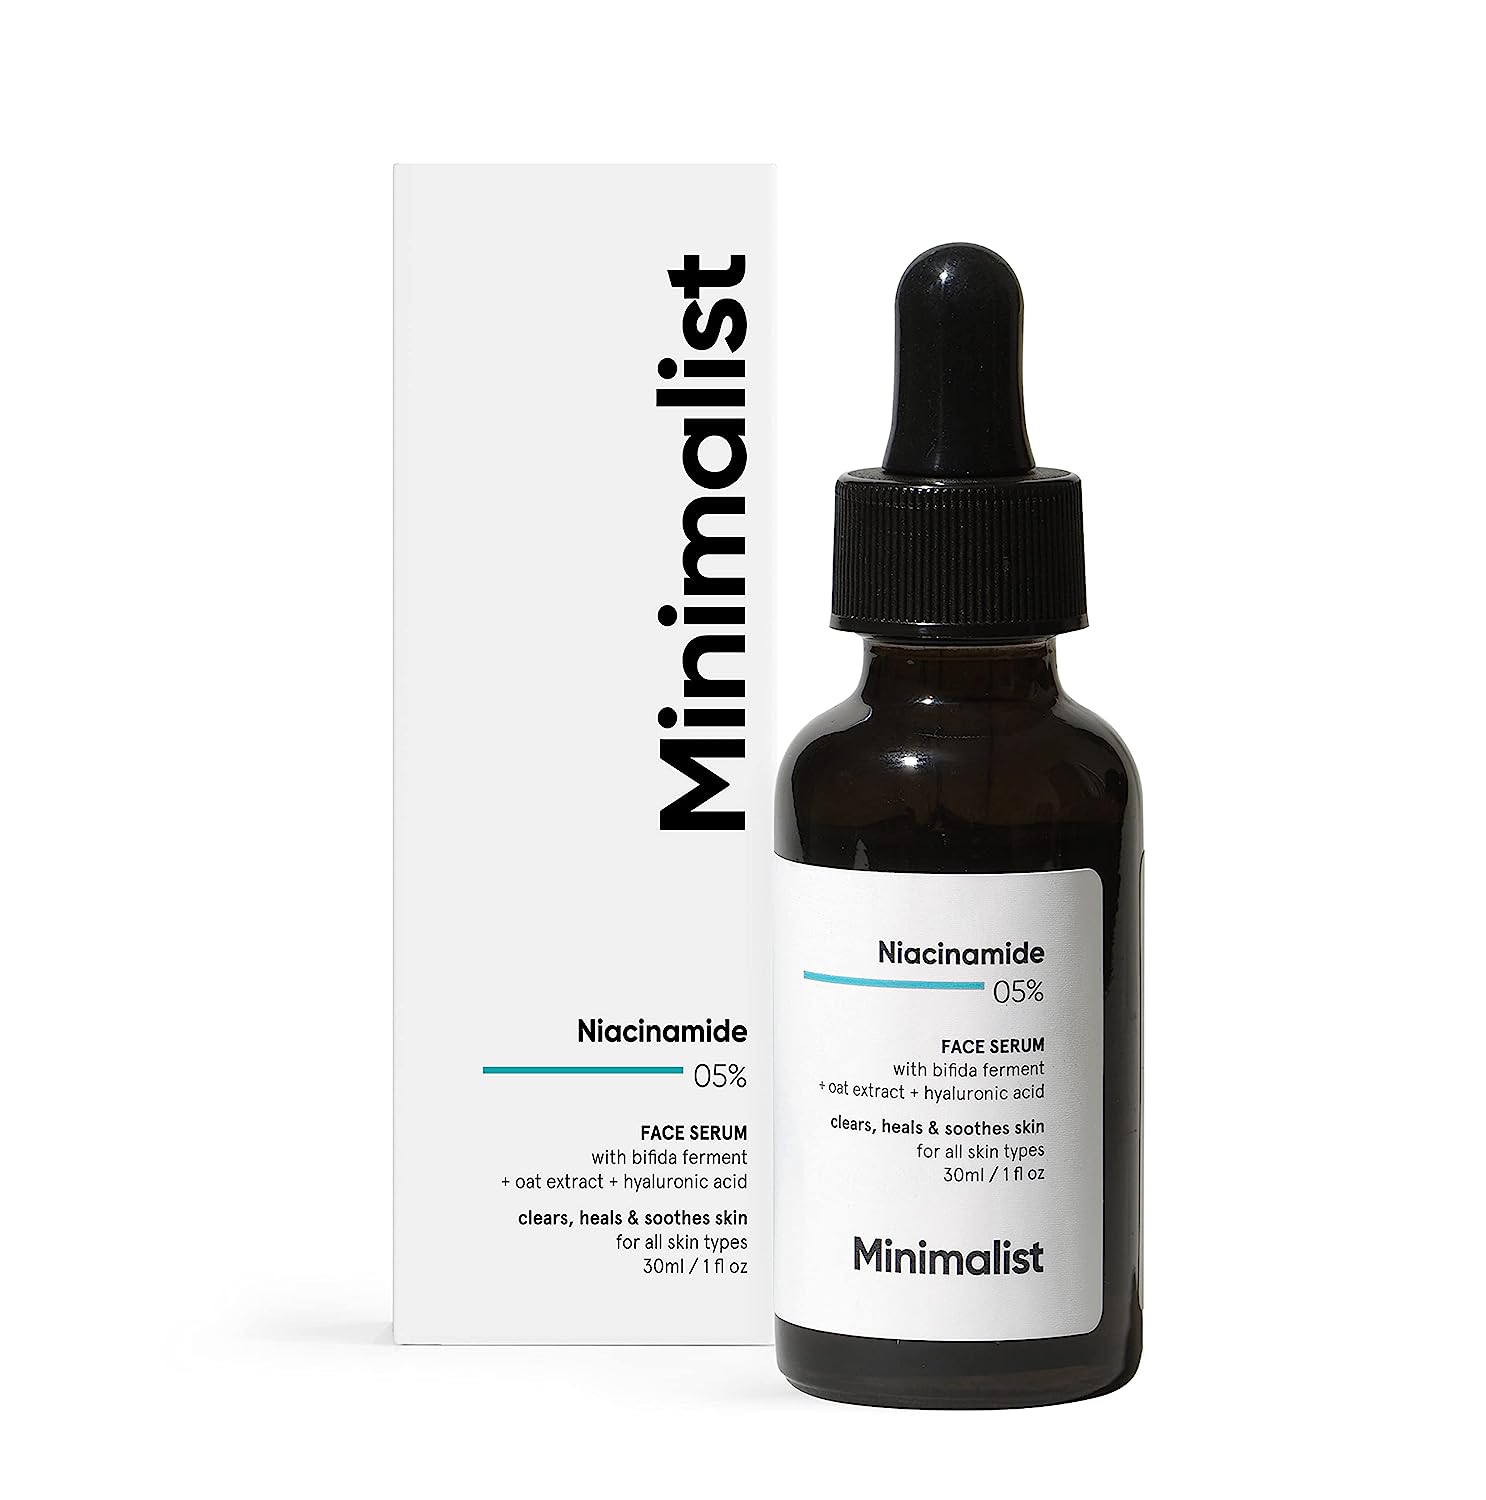 A bottle of Minimalist 5% Niacinamide Face Serum surrounded by vibrant, glowing skinMinimalist, minimalist sunscreen, minimalist, alpha arbutin serum, alpha arbutin, minimalist serum, minimalist skincare, minimalist vitamin C serum, vitamin C serum, minimalist products, minimalist face wash, niacinamide serum, minimalist sunscreen stick, minimalist sunscreen SPF 50, minimalist coupon code, minimalist salicylic acid face wash, salicylic acid serum, Be Minimalist, minimalist toner, minimalist website, retinol serum, minimalist discount code, blemish, hydroquinone,